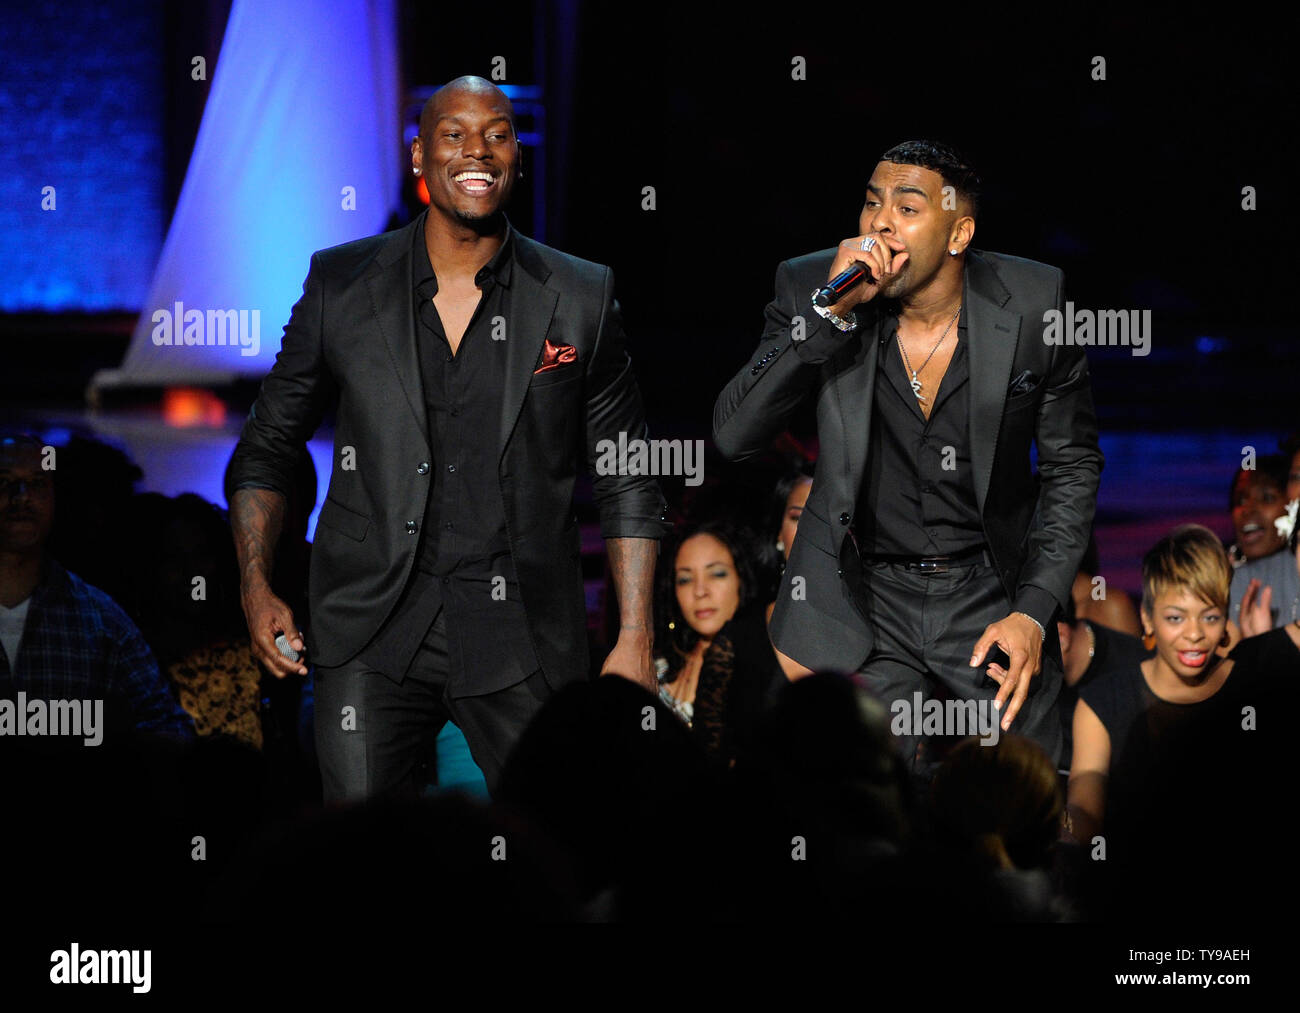 Recording artists Tyrese Gibson (L) and Ginuwine of TGT perform during the Soul Train Awards 2012 at PH Live at Planet Hollywood Resort & Casino in Las Vegas, Nevada on Nov. 08, 2012.   UPI/David Becker Stock Photo